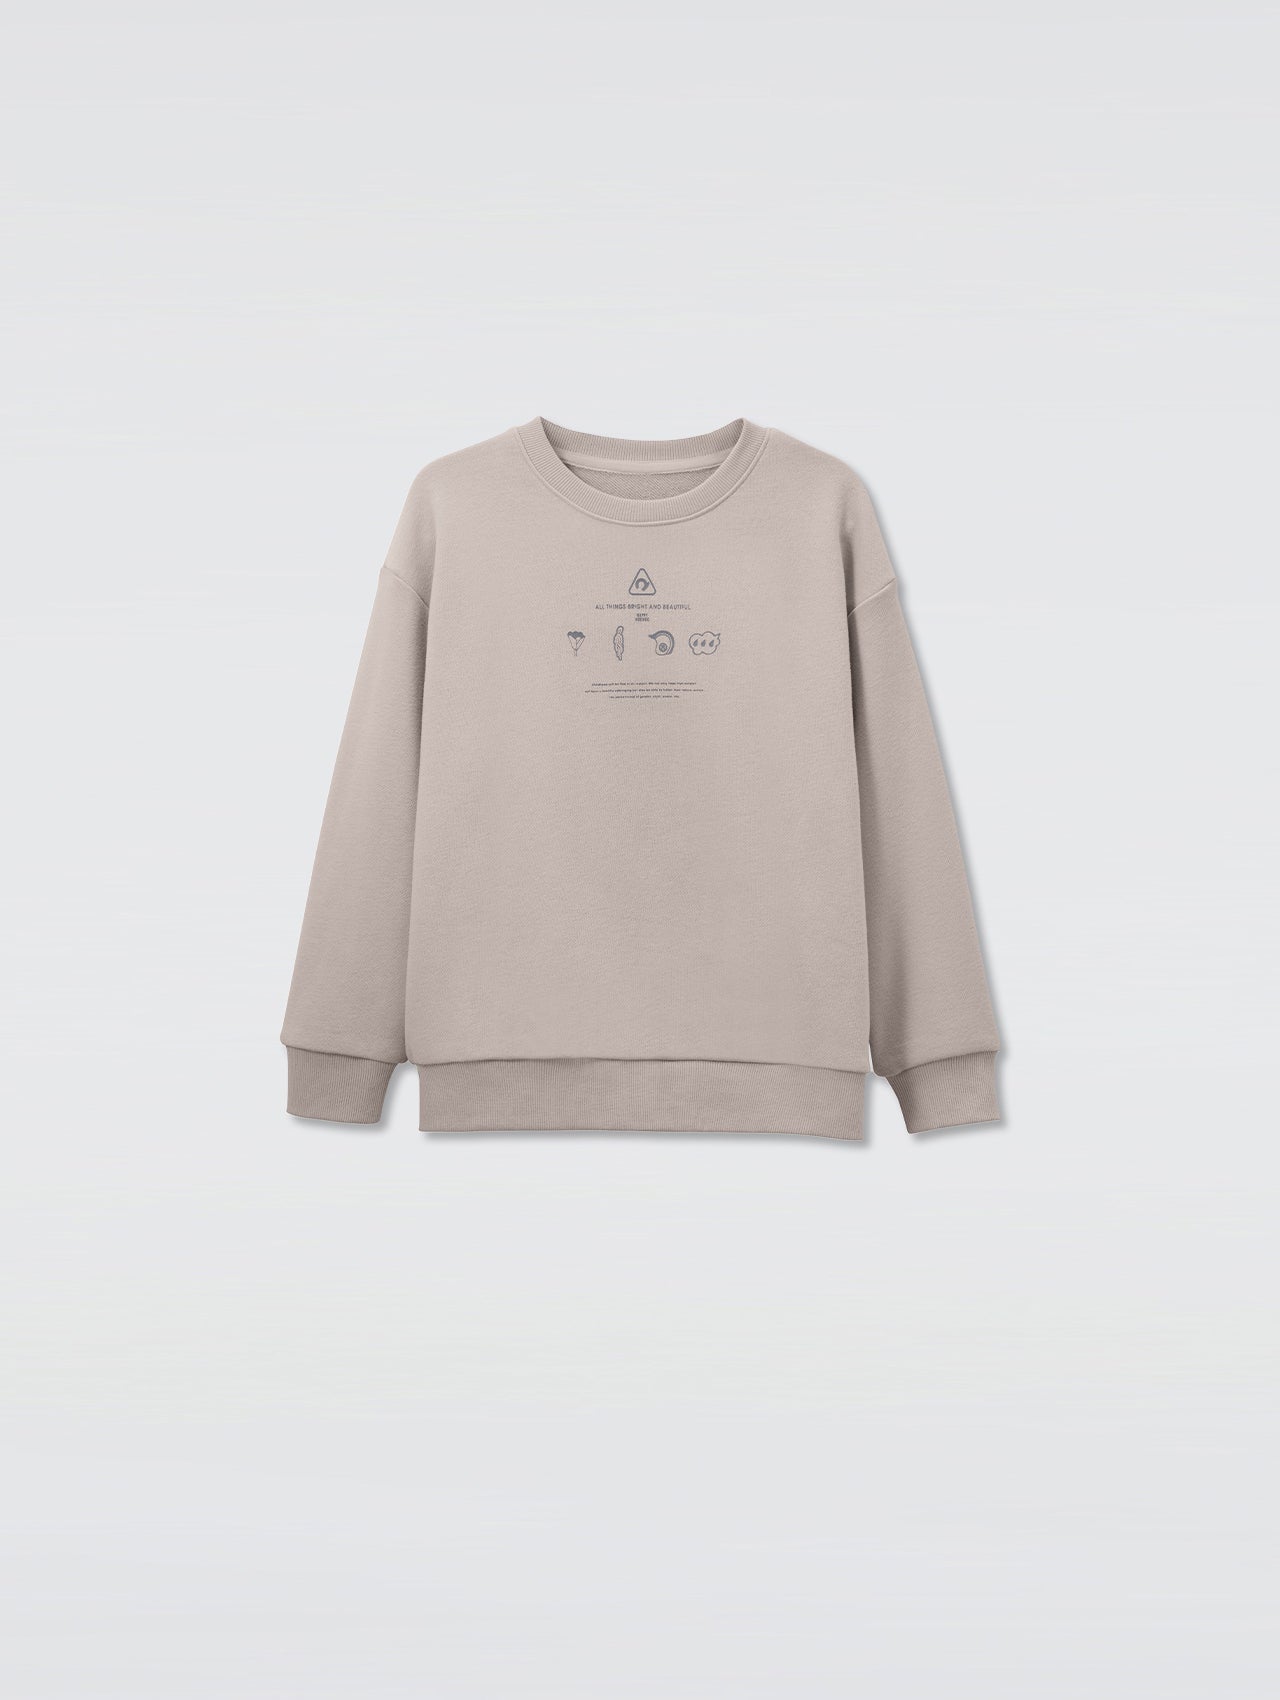 Free gift —— Sweatshirt（Not available separately and non-refundable）